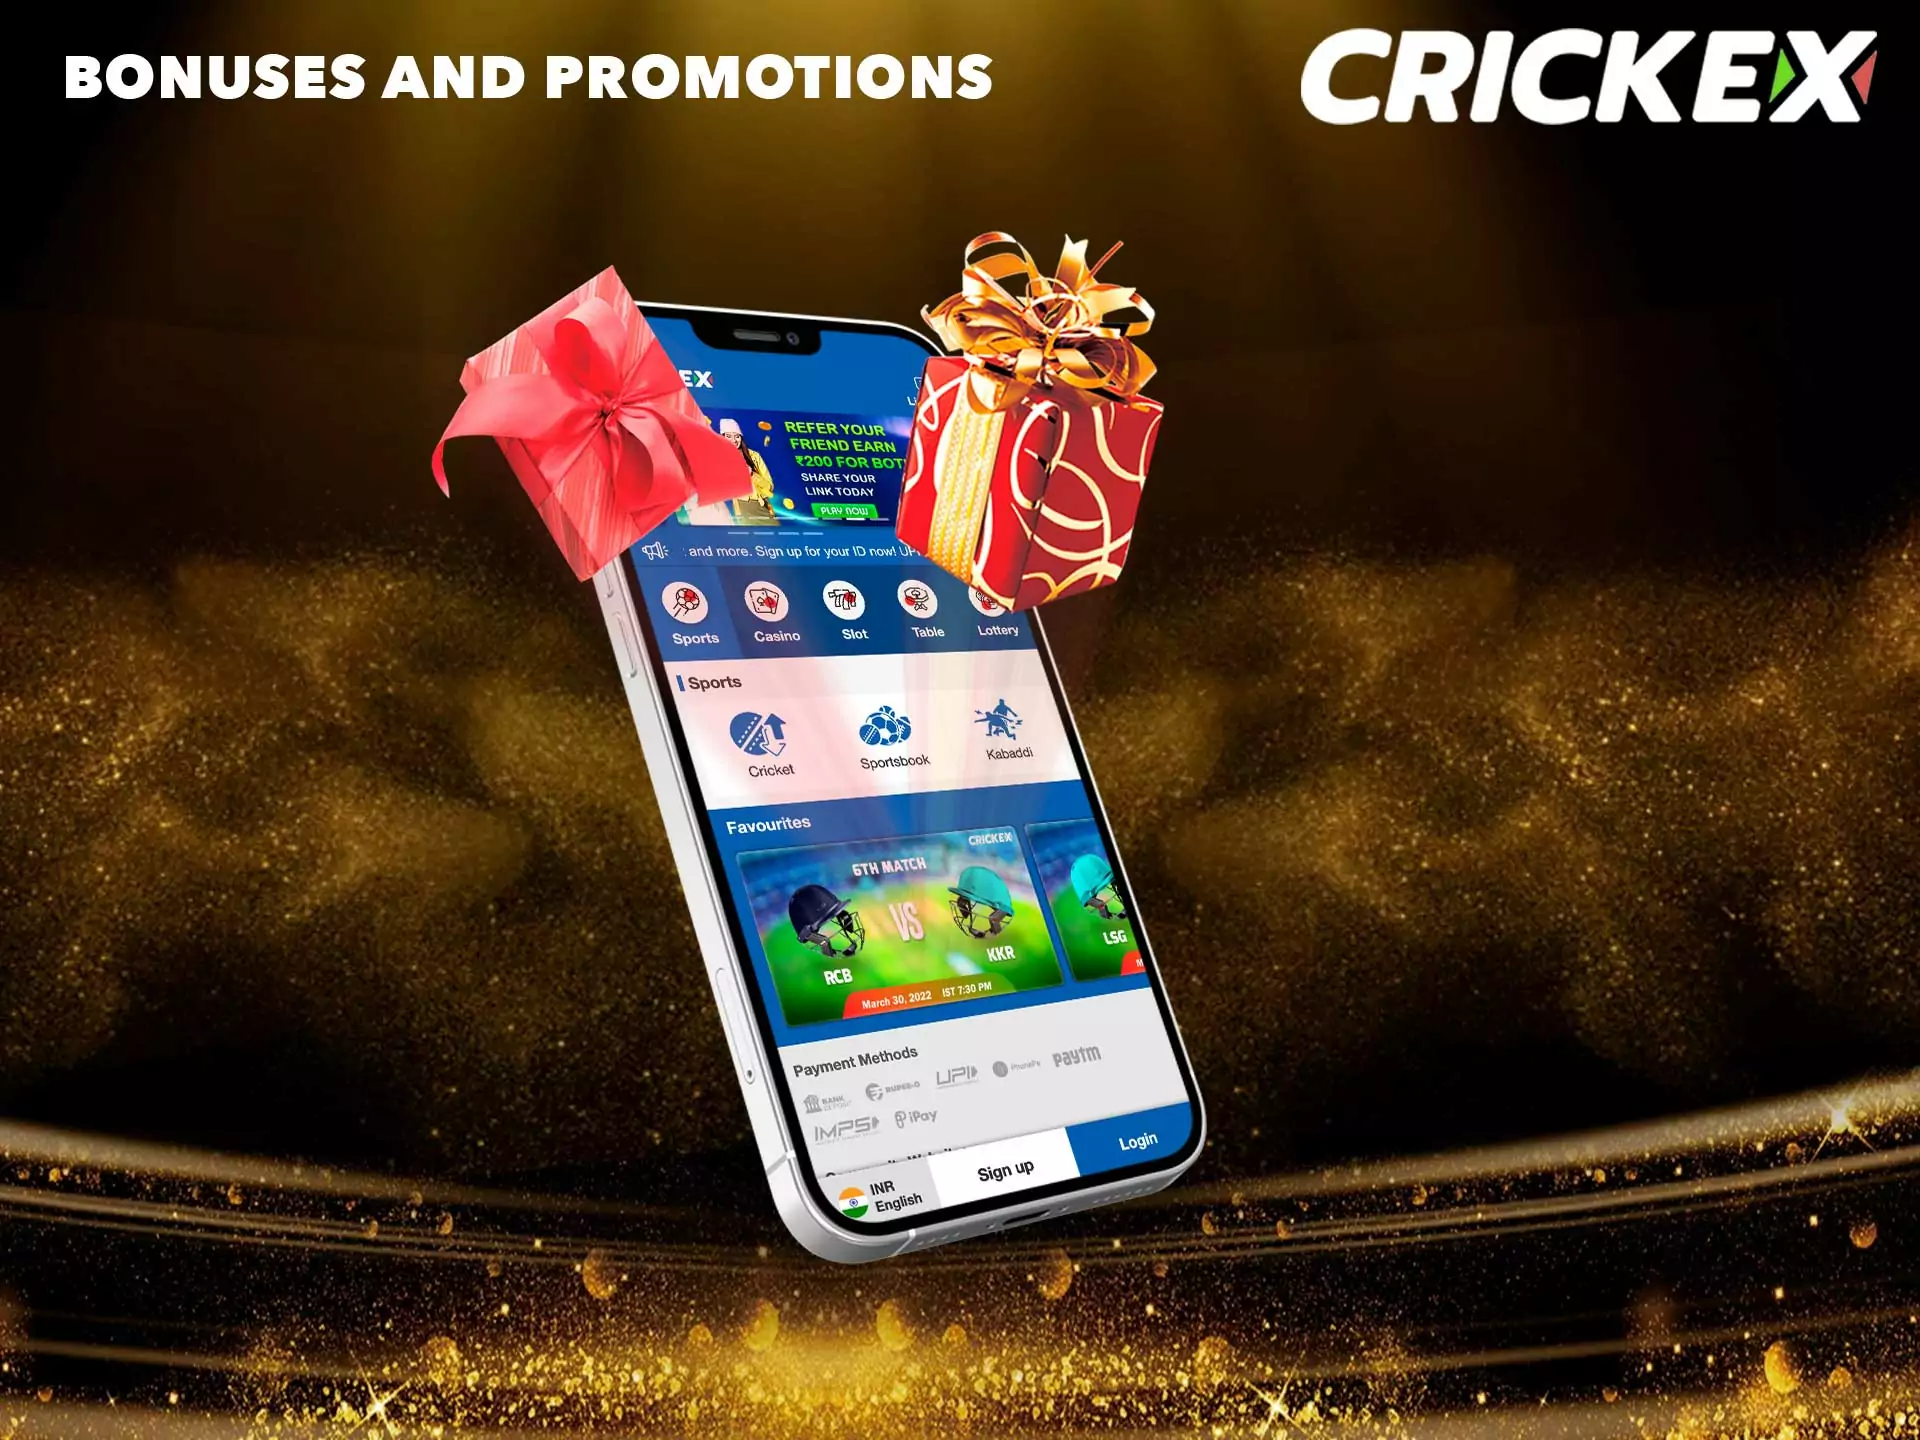 Crickex offers many bonuses for sports betting.